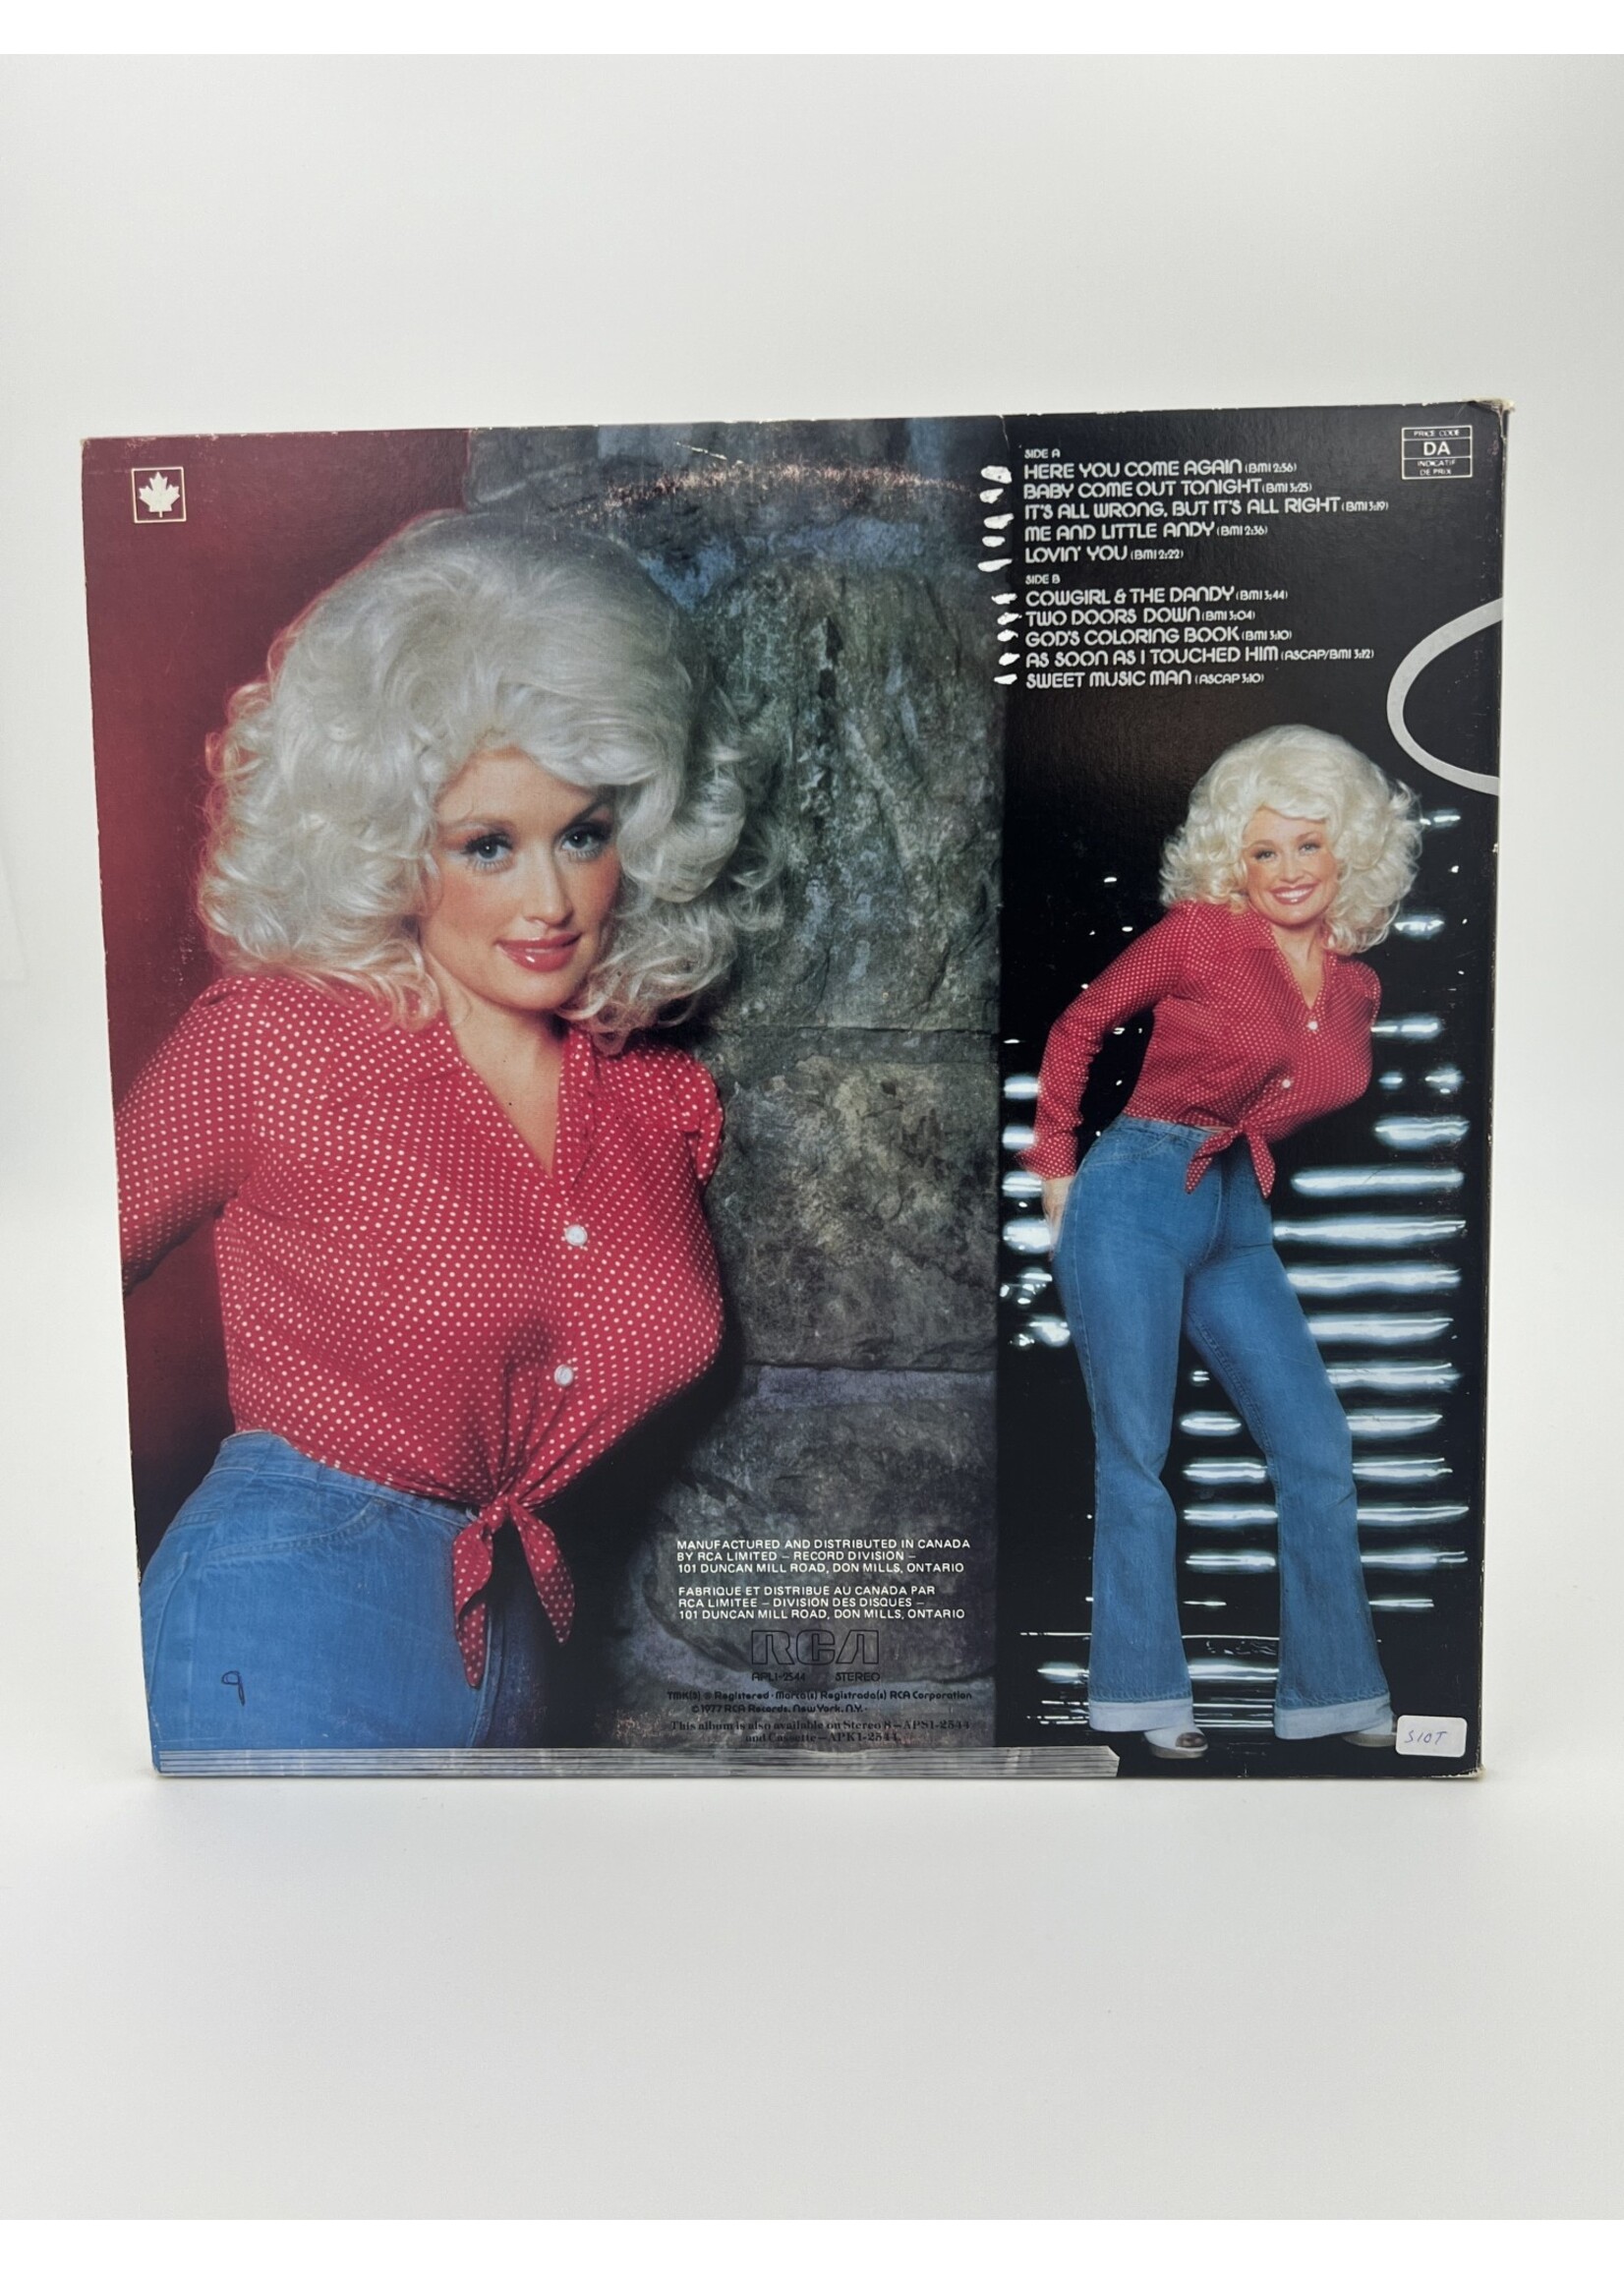 LP   Dolly Parton Here You Come Again LP Record